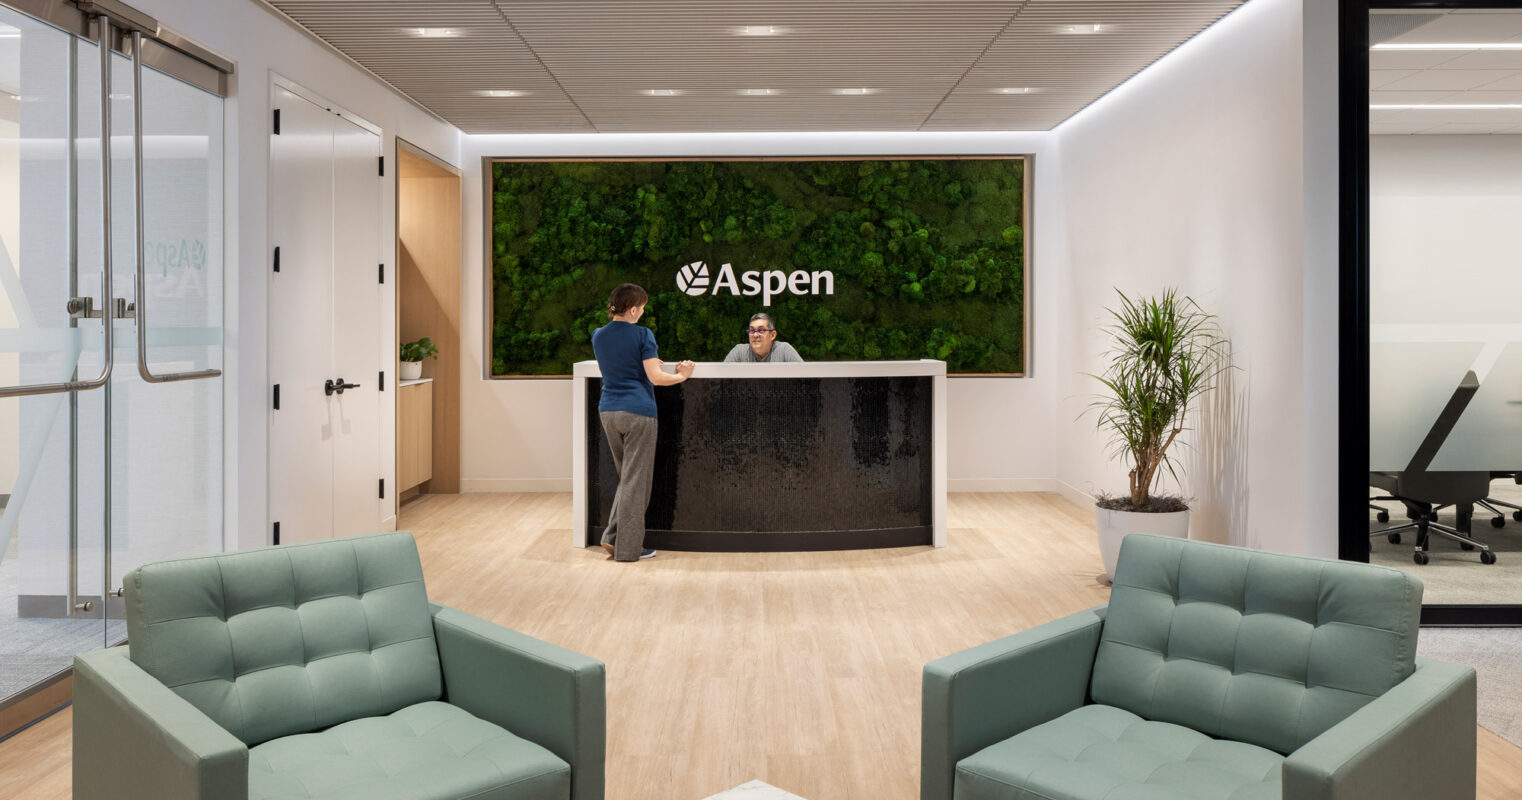 Modern office lobby with a living green wall backdrop, featuring the Aspen logo. Streamlined reception desk with two employees and geometric wood flooring contrast with plush sea-green armchairs and minimalist glass partition.